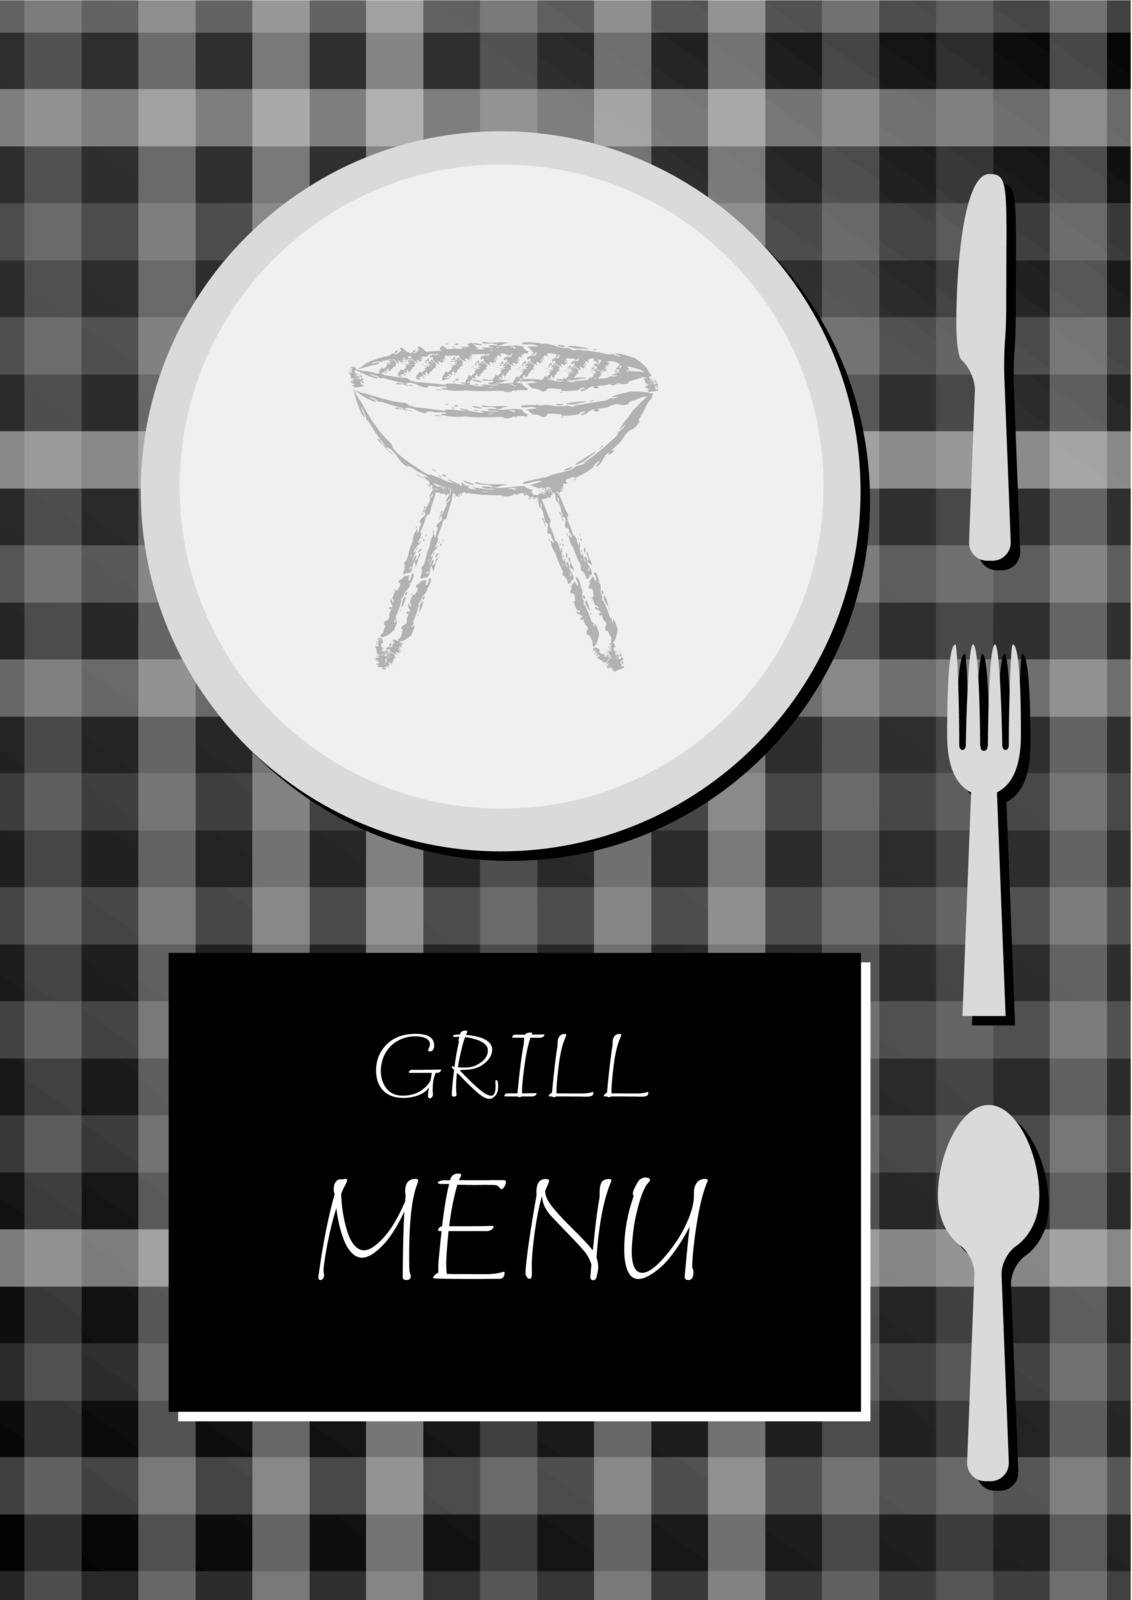 grill menu with black and white colors, squared cloth with plate, food, knife, fork and spoon